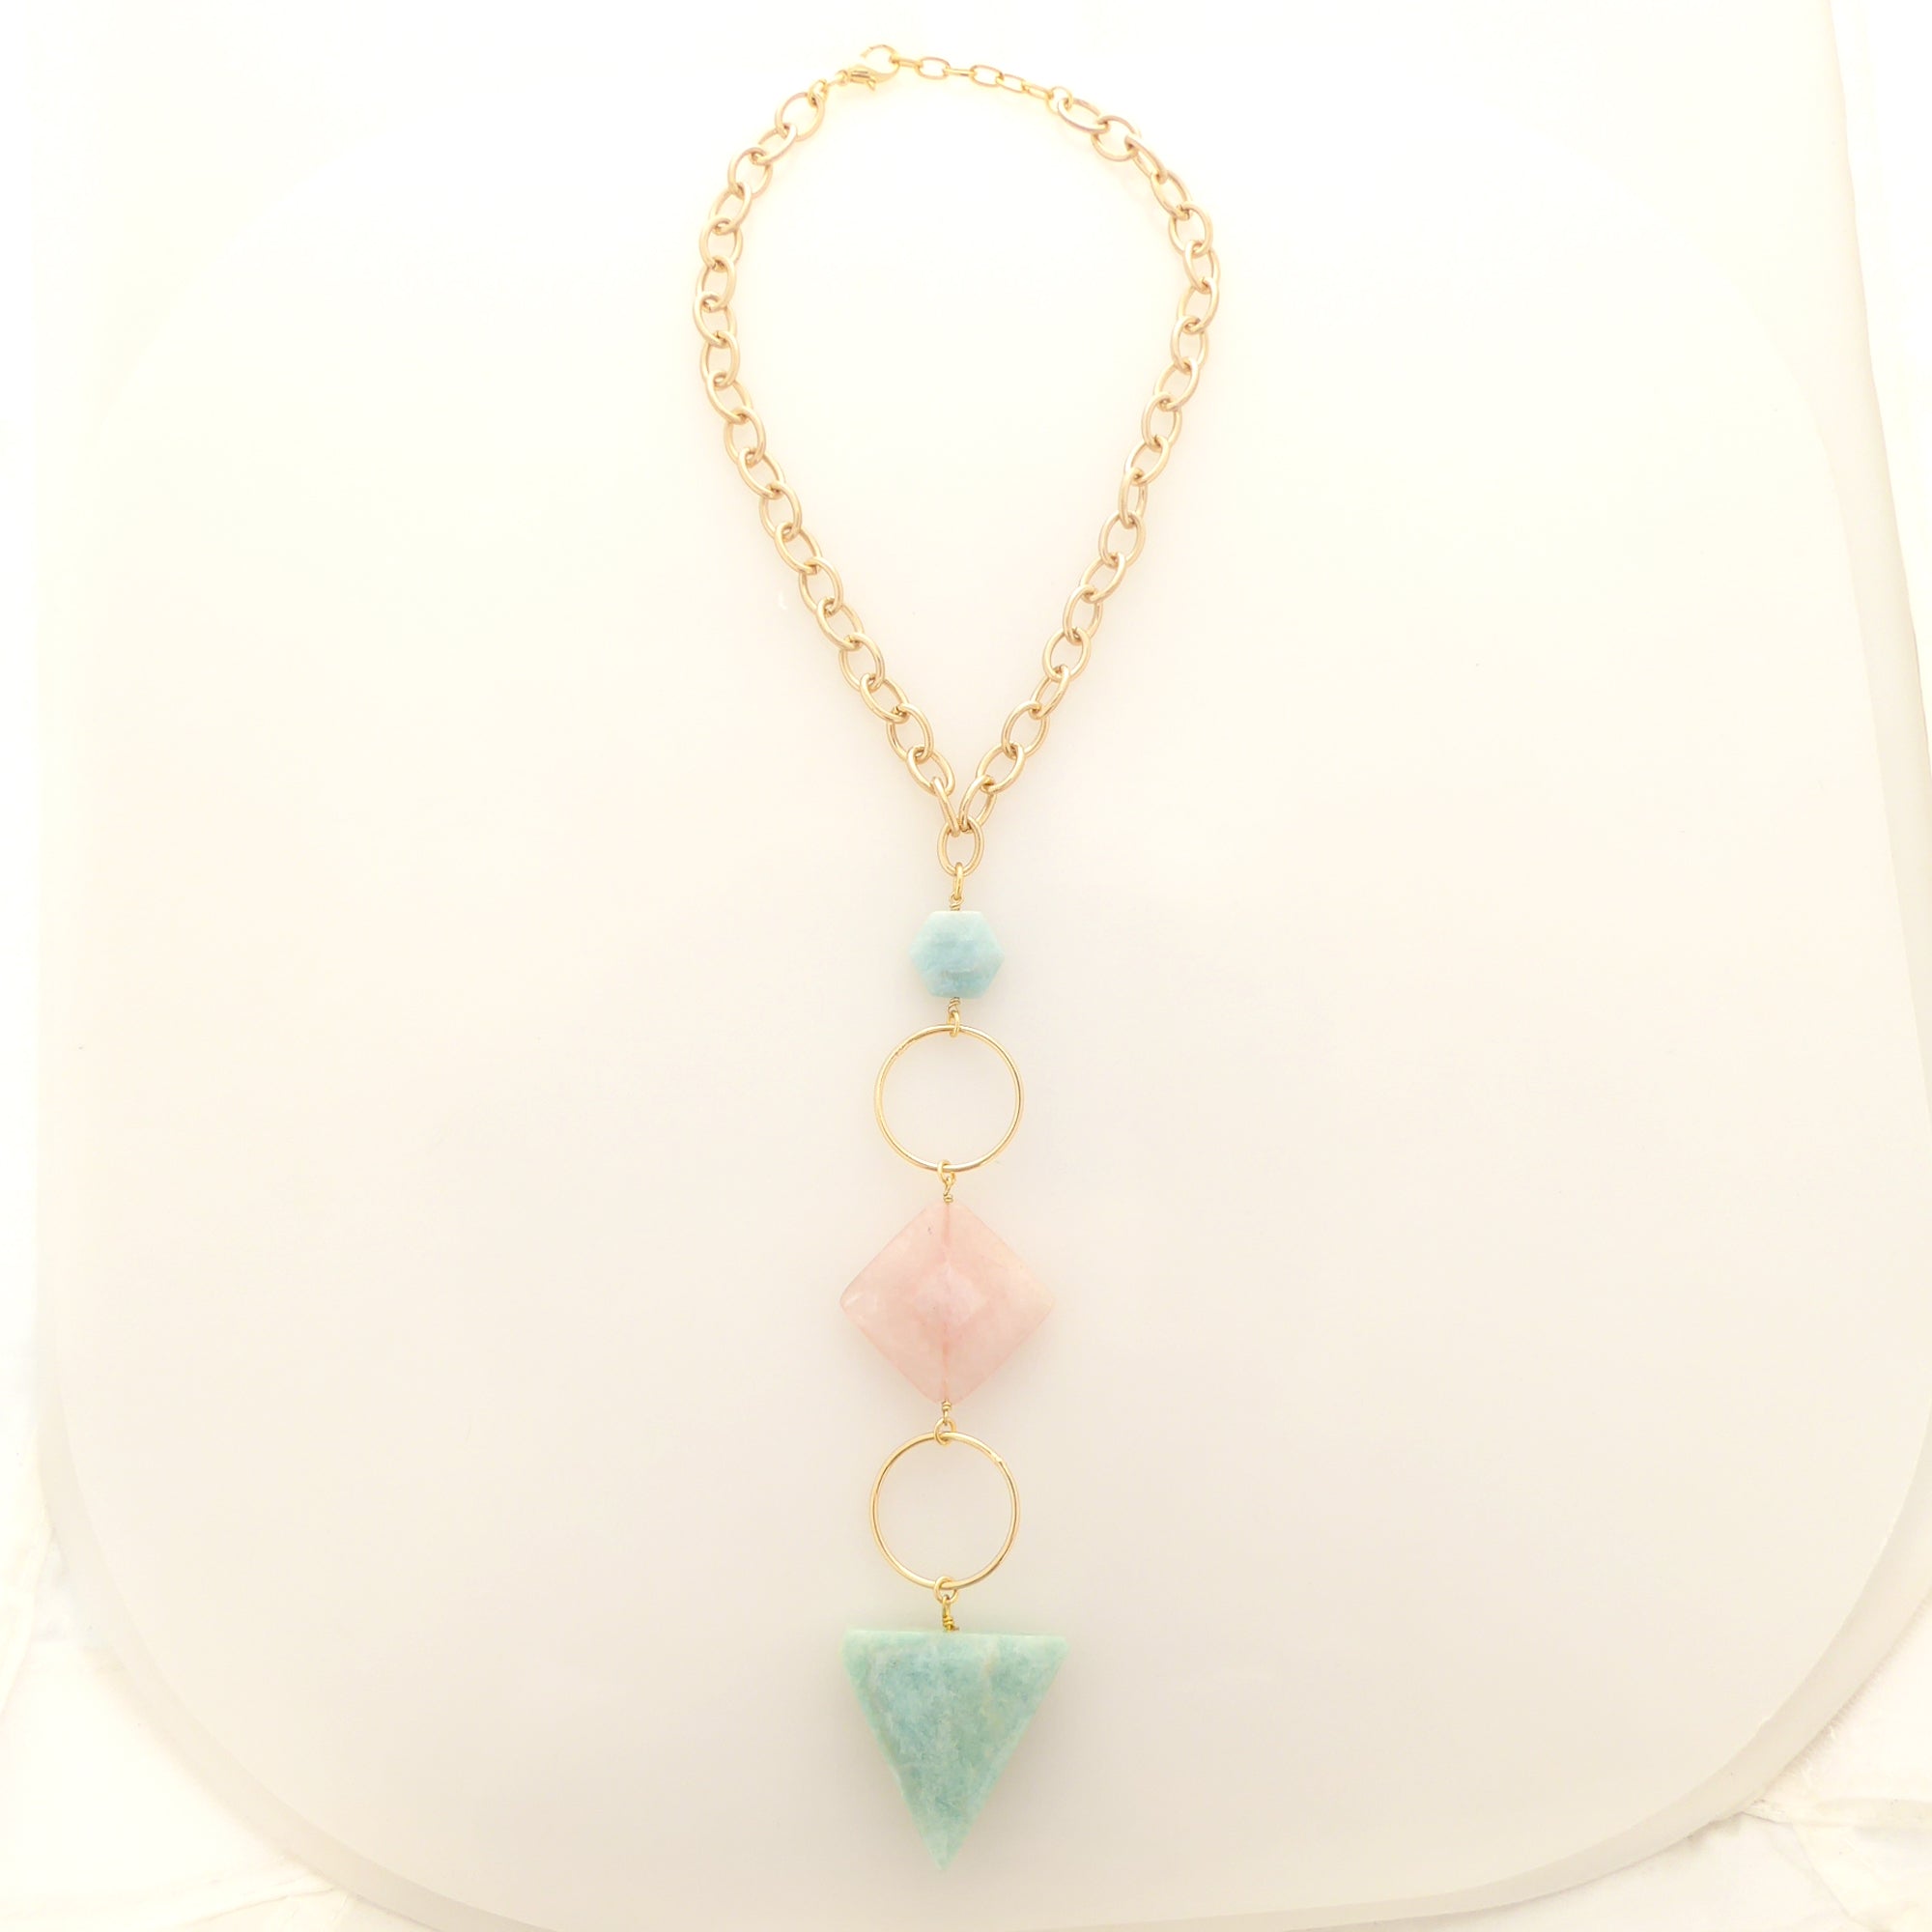 Gioia amazonite and rose quartz necklace by Jenny Dayco 6